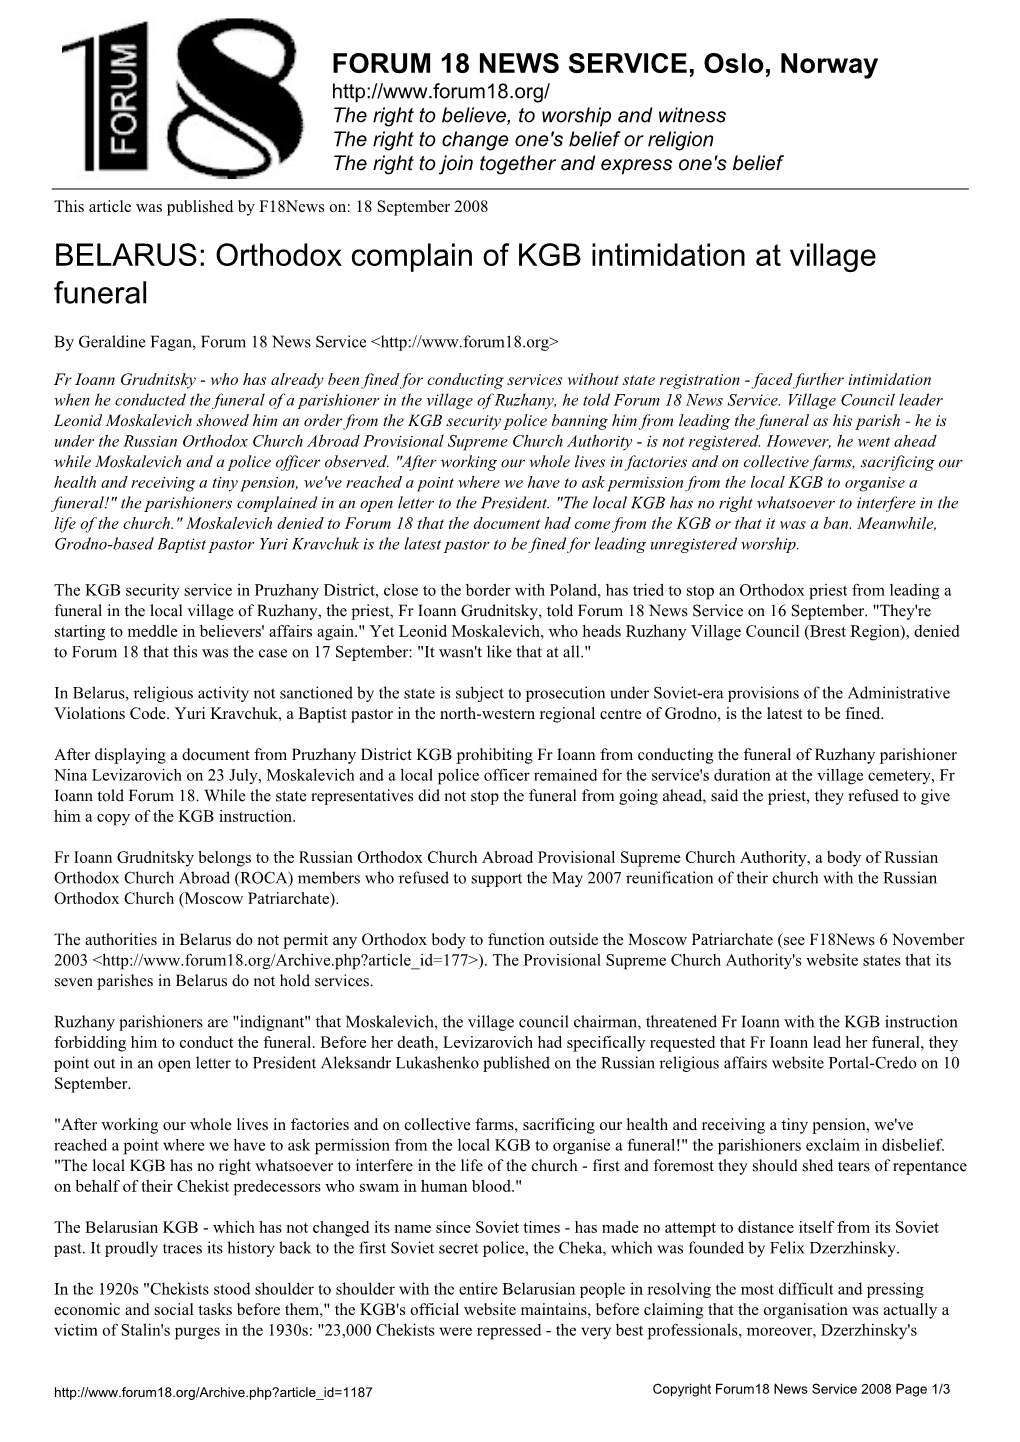 Orthodox Complain of KGB Intimidation at Village Funeral